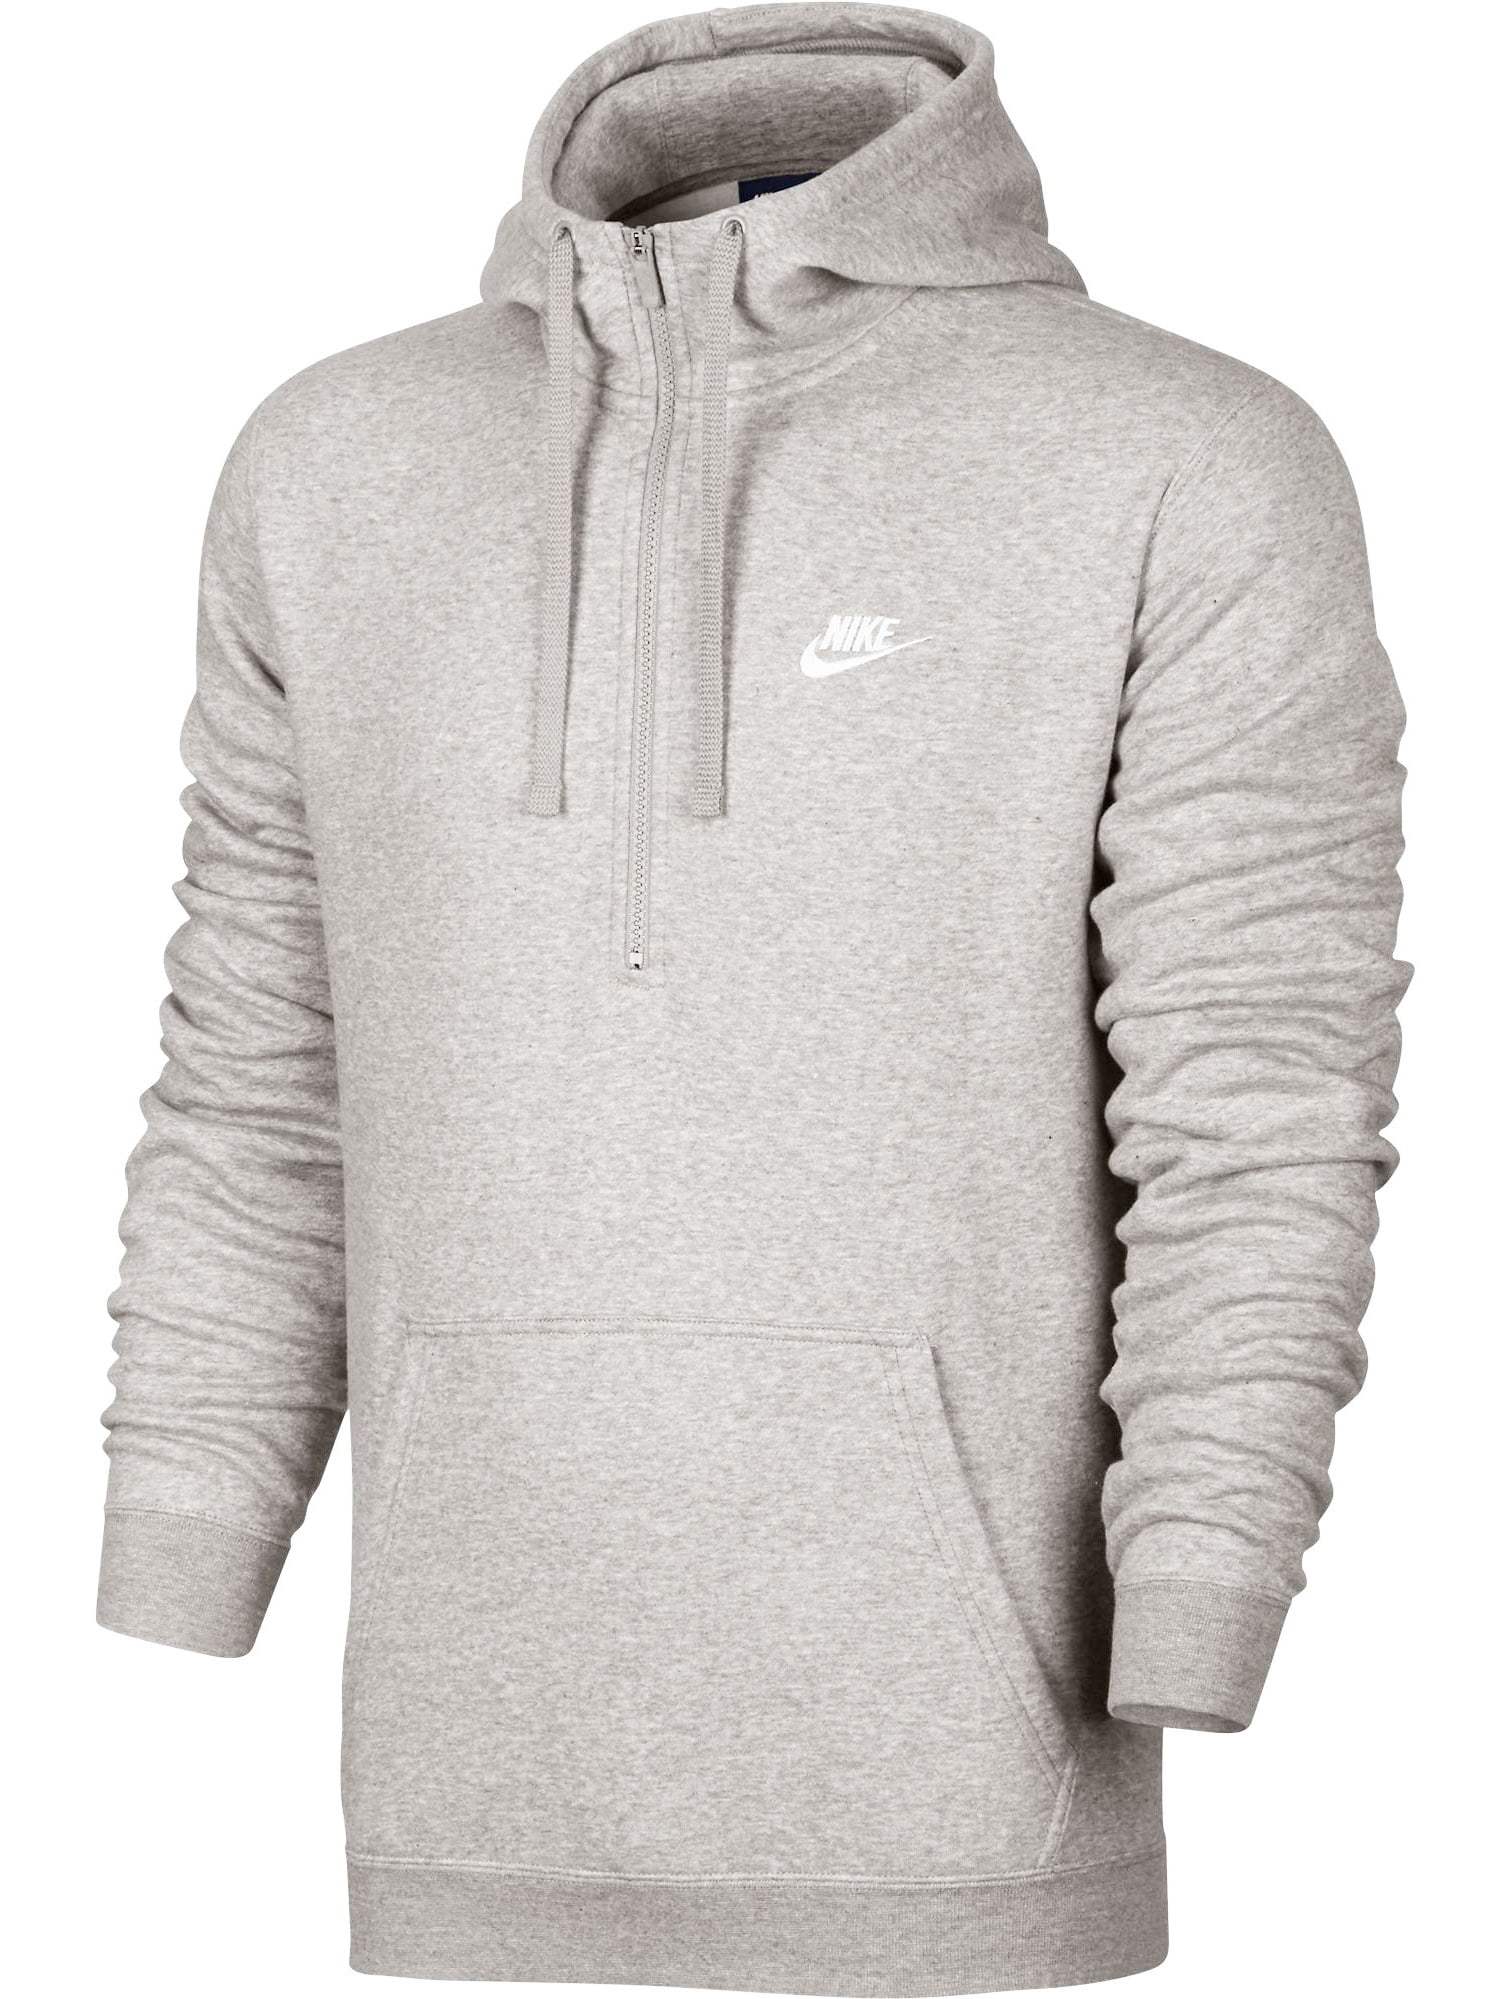 5 Day Nike workout half zip for Beginner